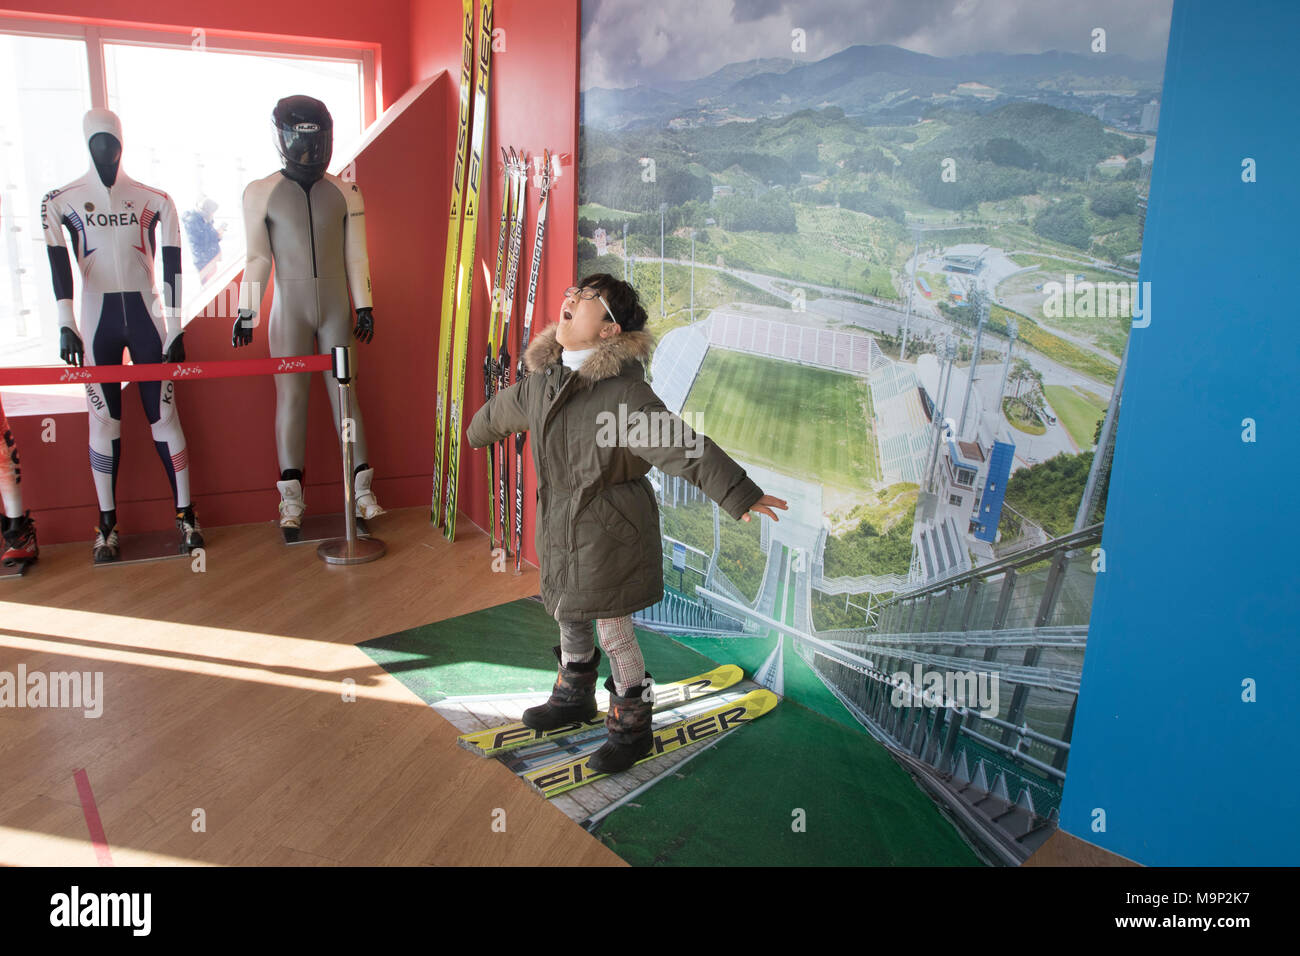 A boy imaginary playing he is flying during a ski jump at the Olympic ski jumping tower of Alpensia resort in South Korea.  The Alpensia Resort is a ski resort and a tourist attraction. It is located on the territory of the township of Daegwallyeong-myeon, in the county of Pyeongchang, hosting the Winter Olympics in February 2018.  The ski resort is approximately 2.5 hours from Seoul or Incheon Airport by car, predominantly all motorway.   Alpensia has six slopes for skiing and snowboarding, with runs up to 1.4 km (0.87 mi) long, for beginners and advanced skiers, and an area reserved for Stock Photo